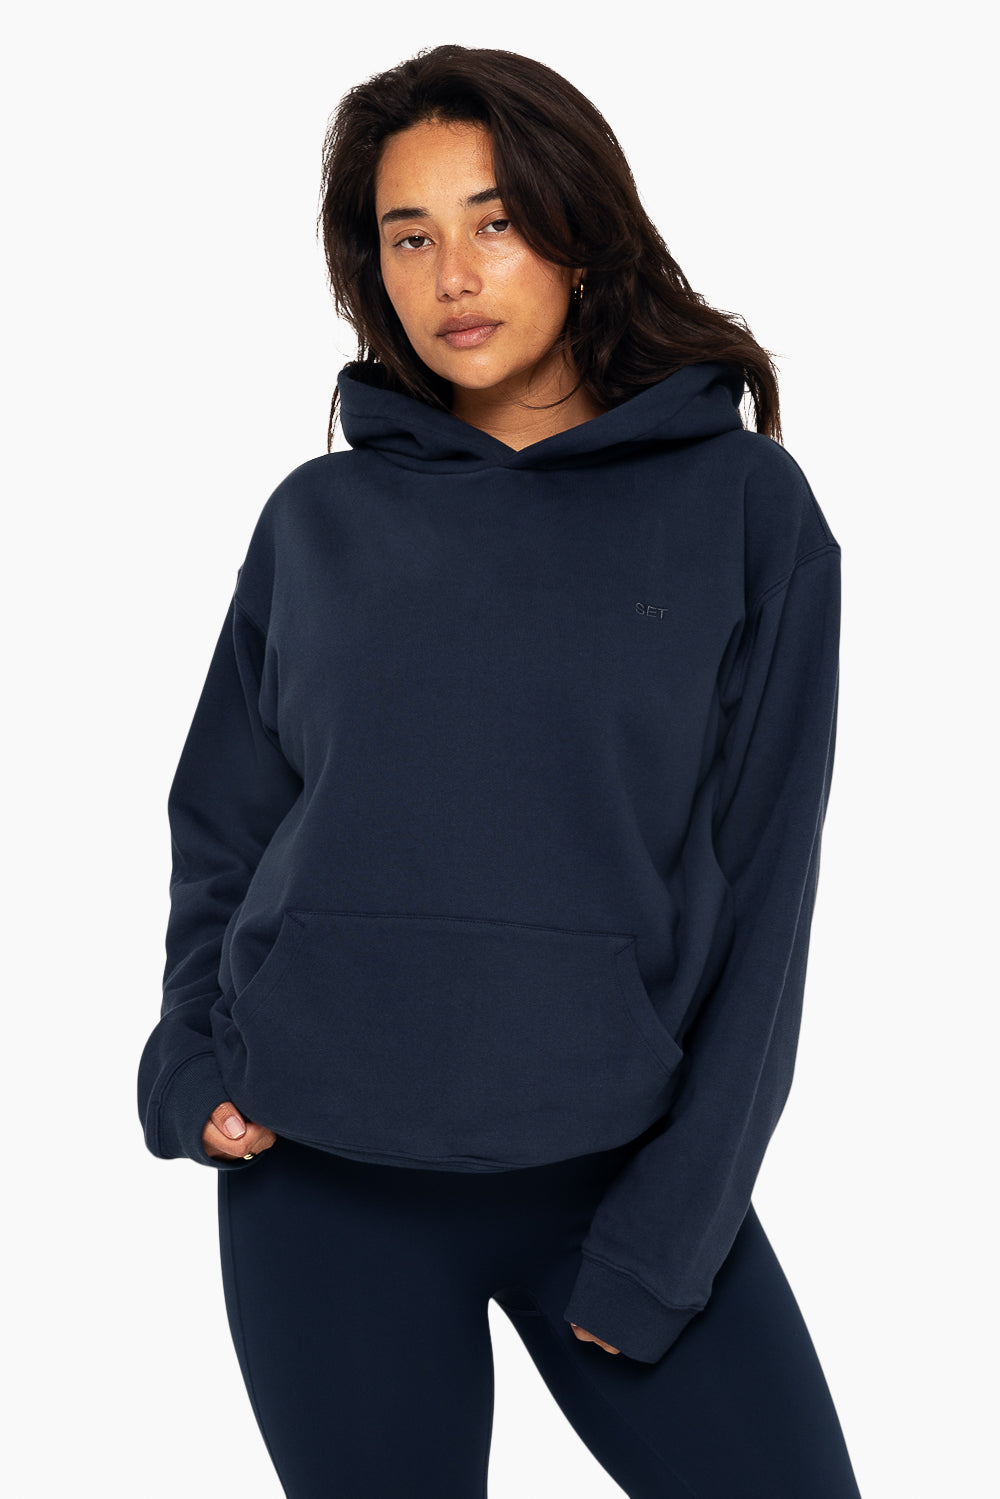 HEAVYWEIGHT SWEATS HOODIE - OXFORD Featured Image